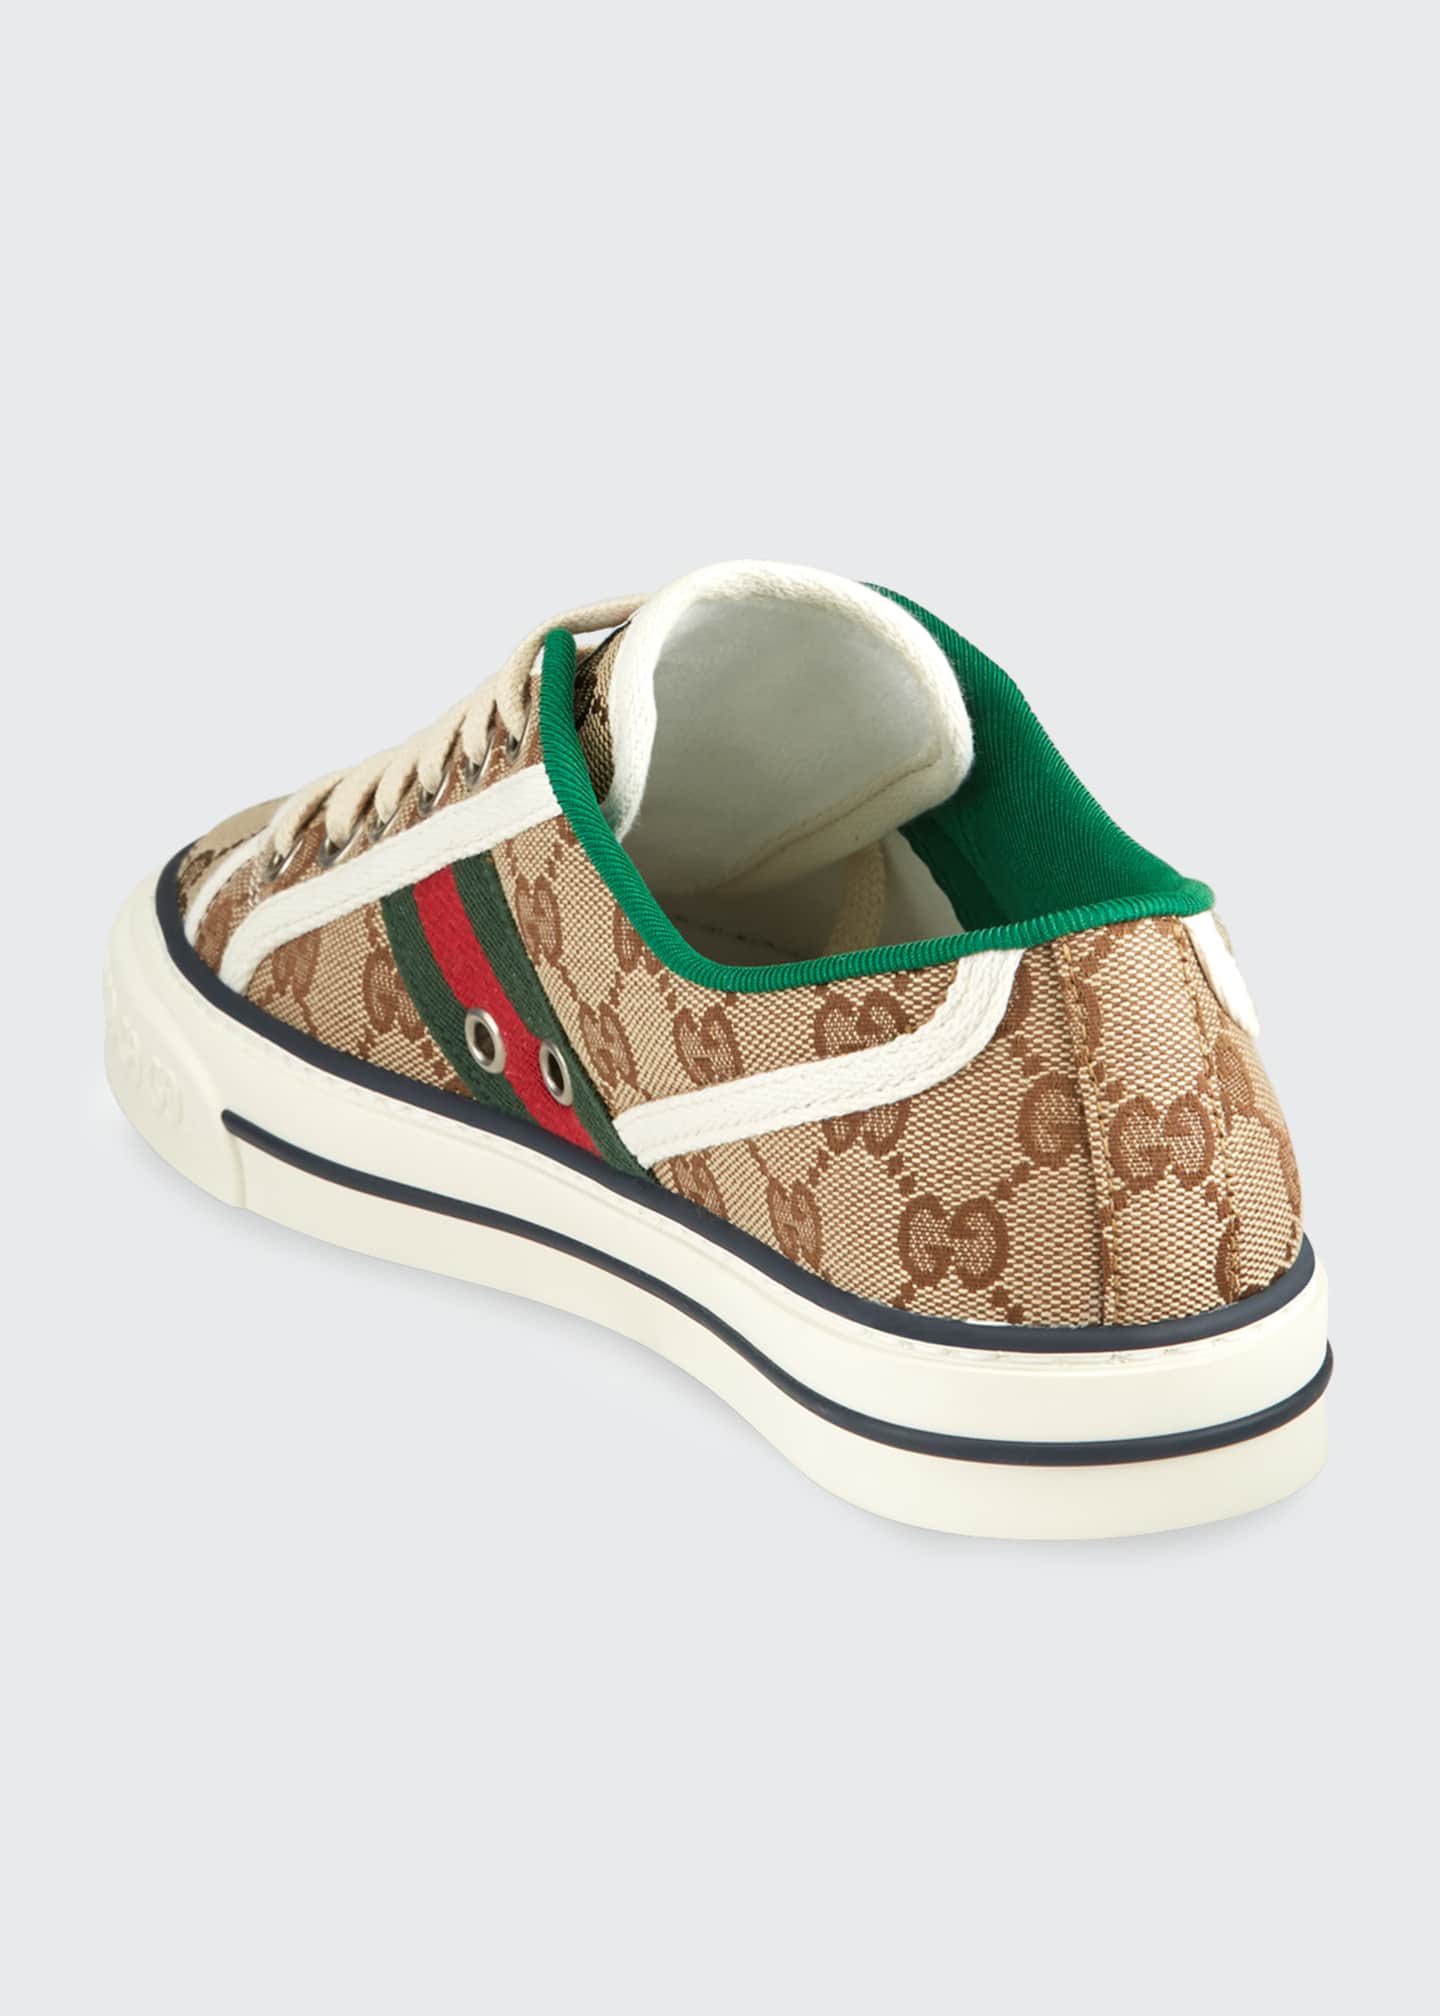 Gucci Gucci Tennis 1977 Sneakers Image 3 of 4